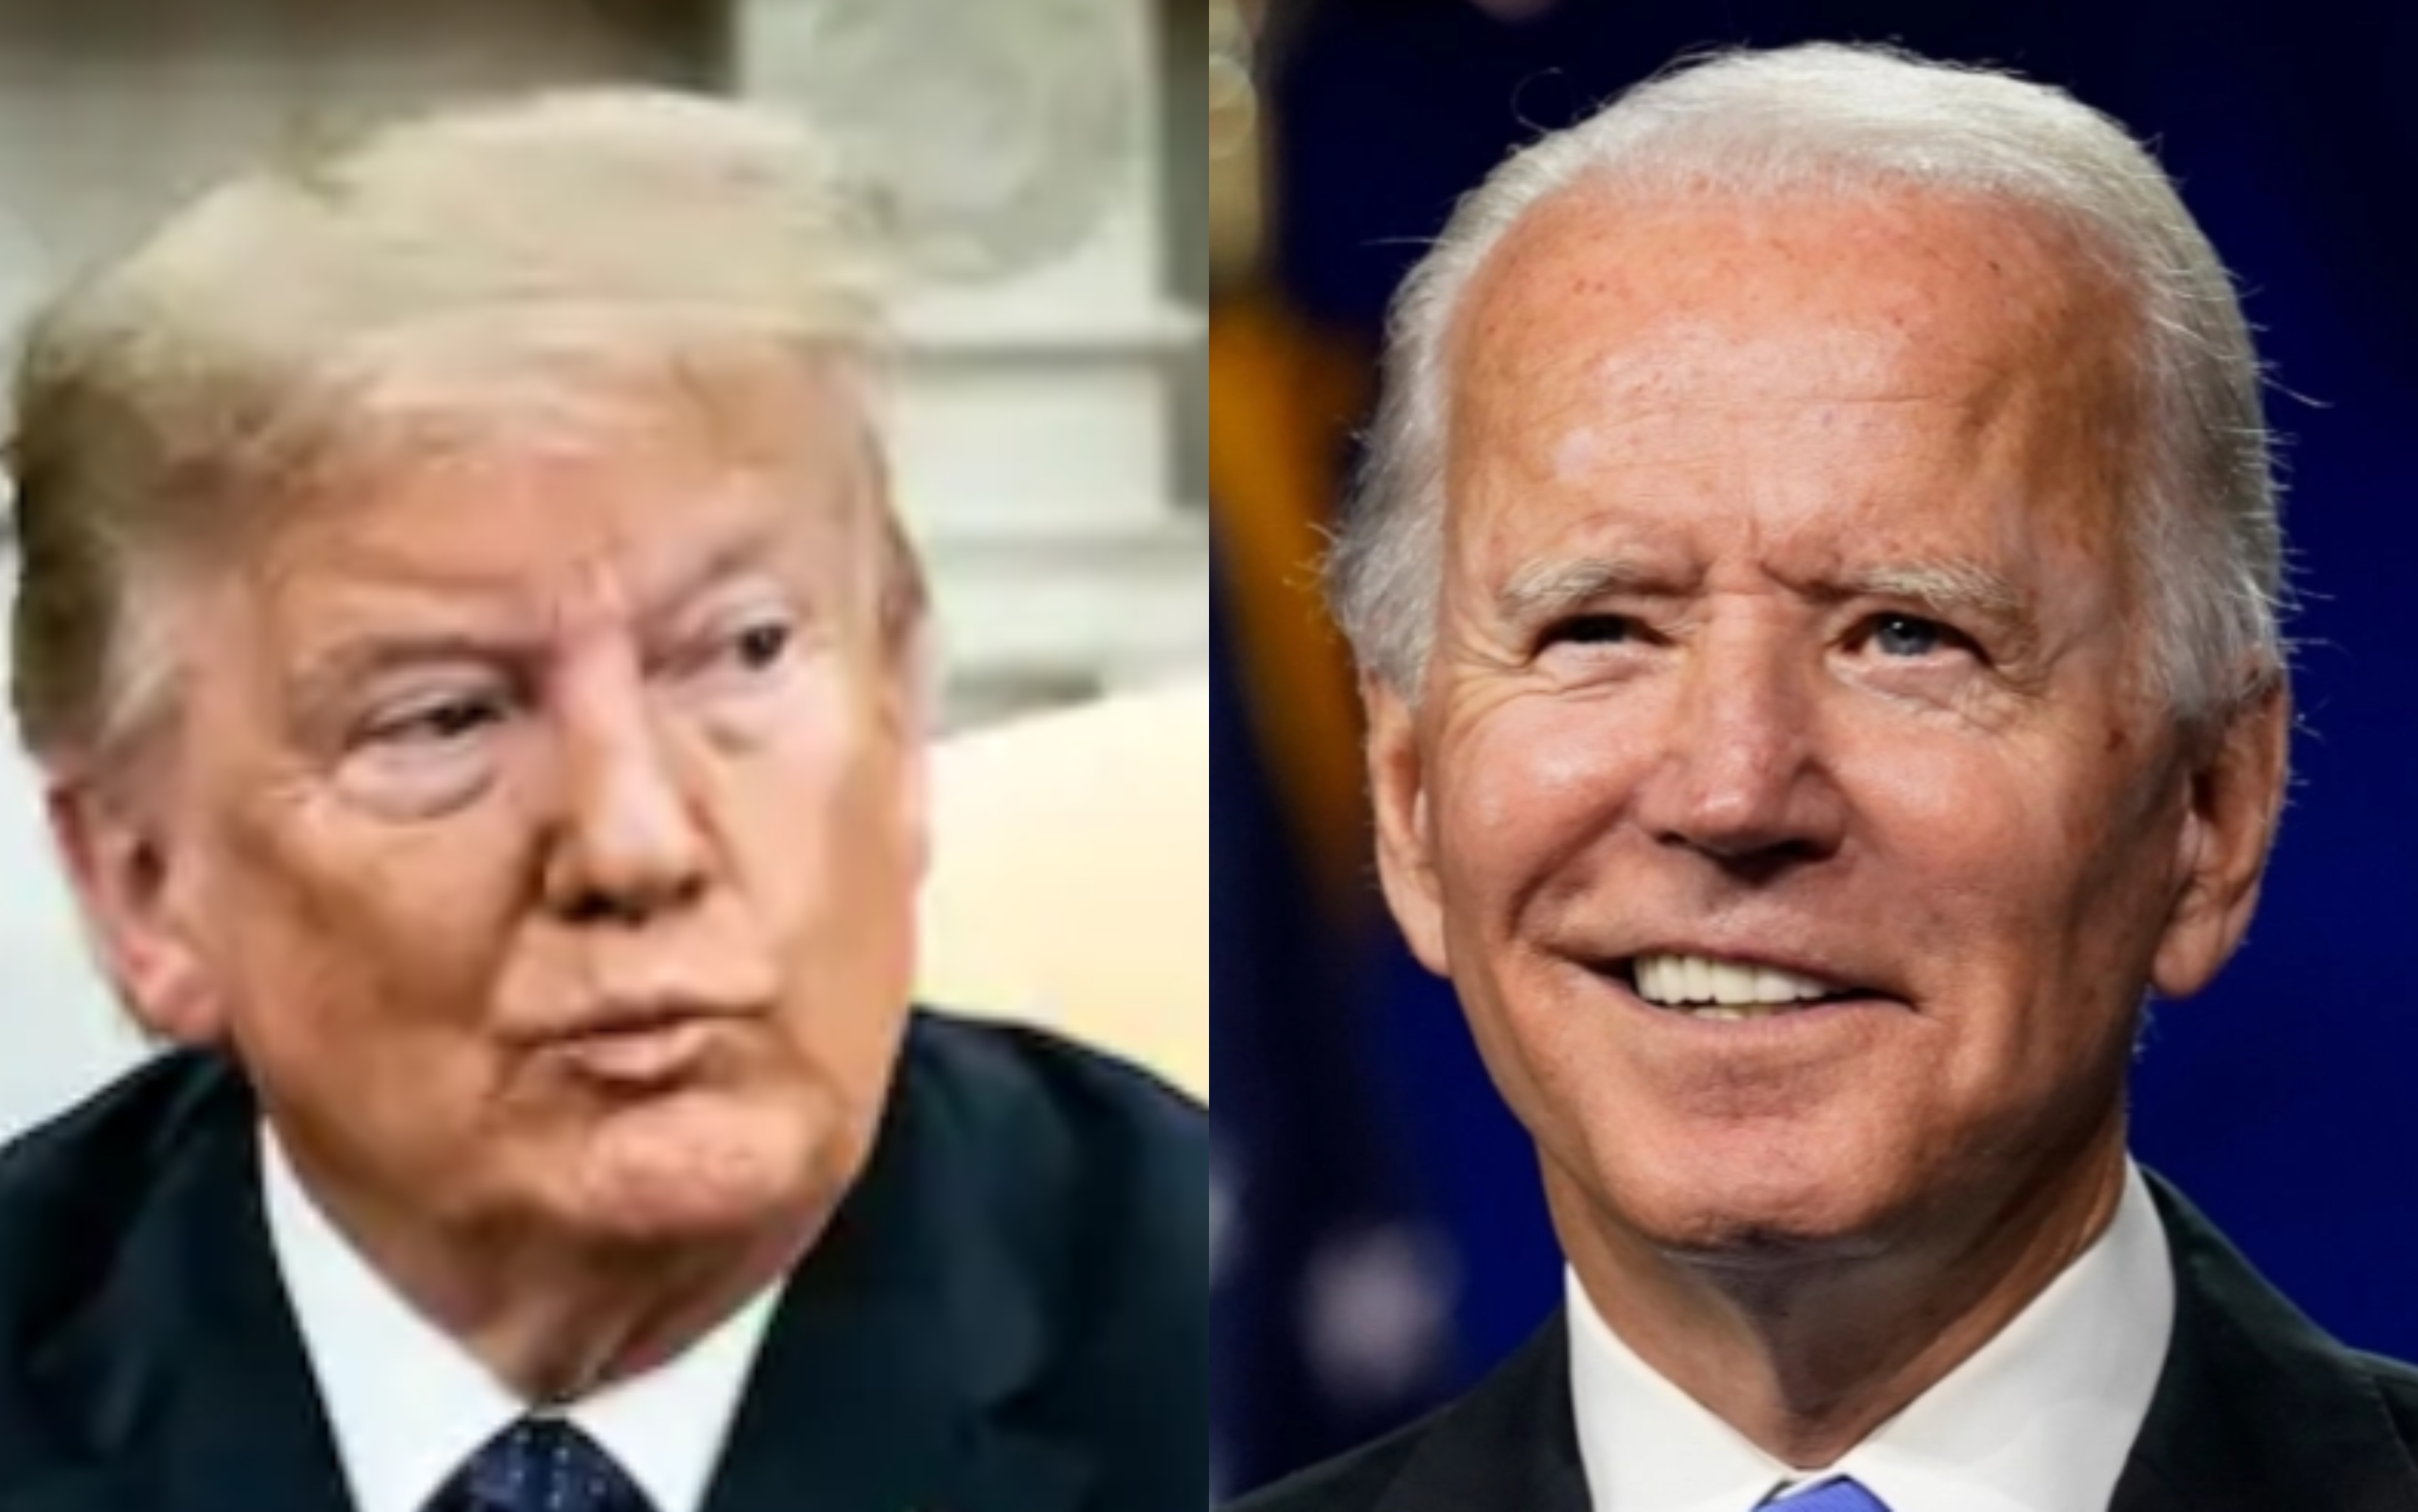 Trump and Biden move along but in different ways